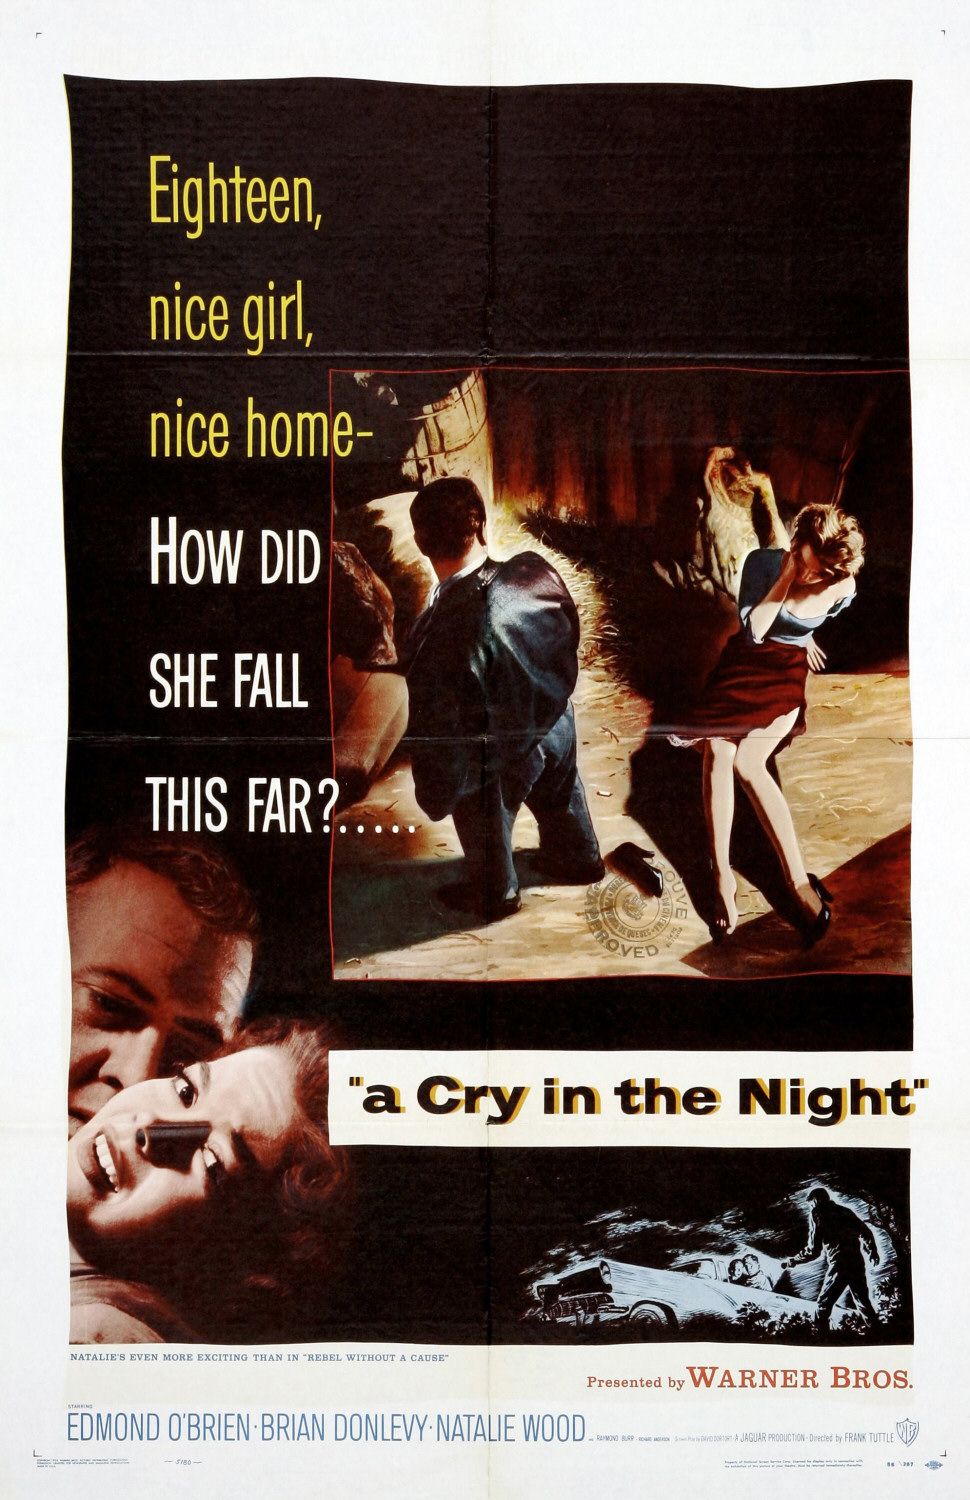 A Cry in the Night (film) Warner Bros